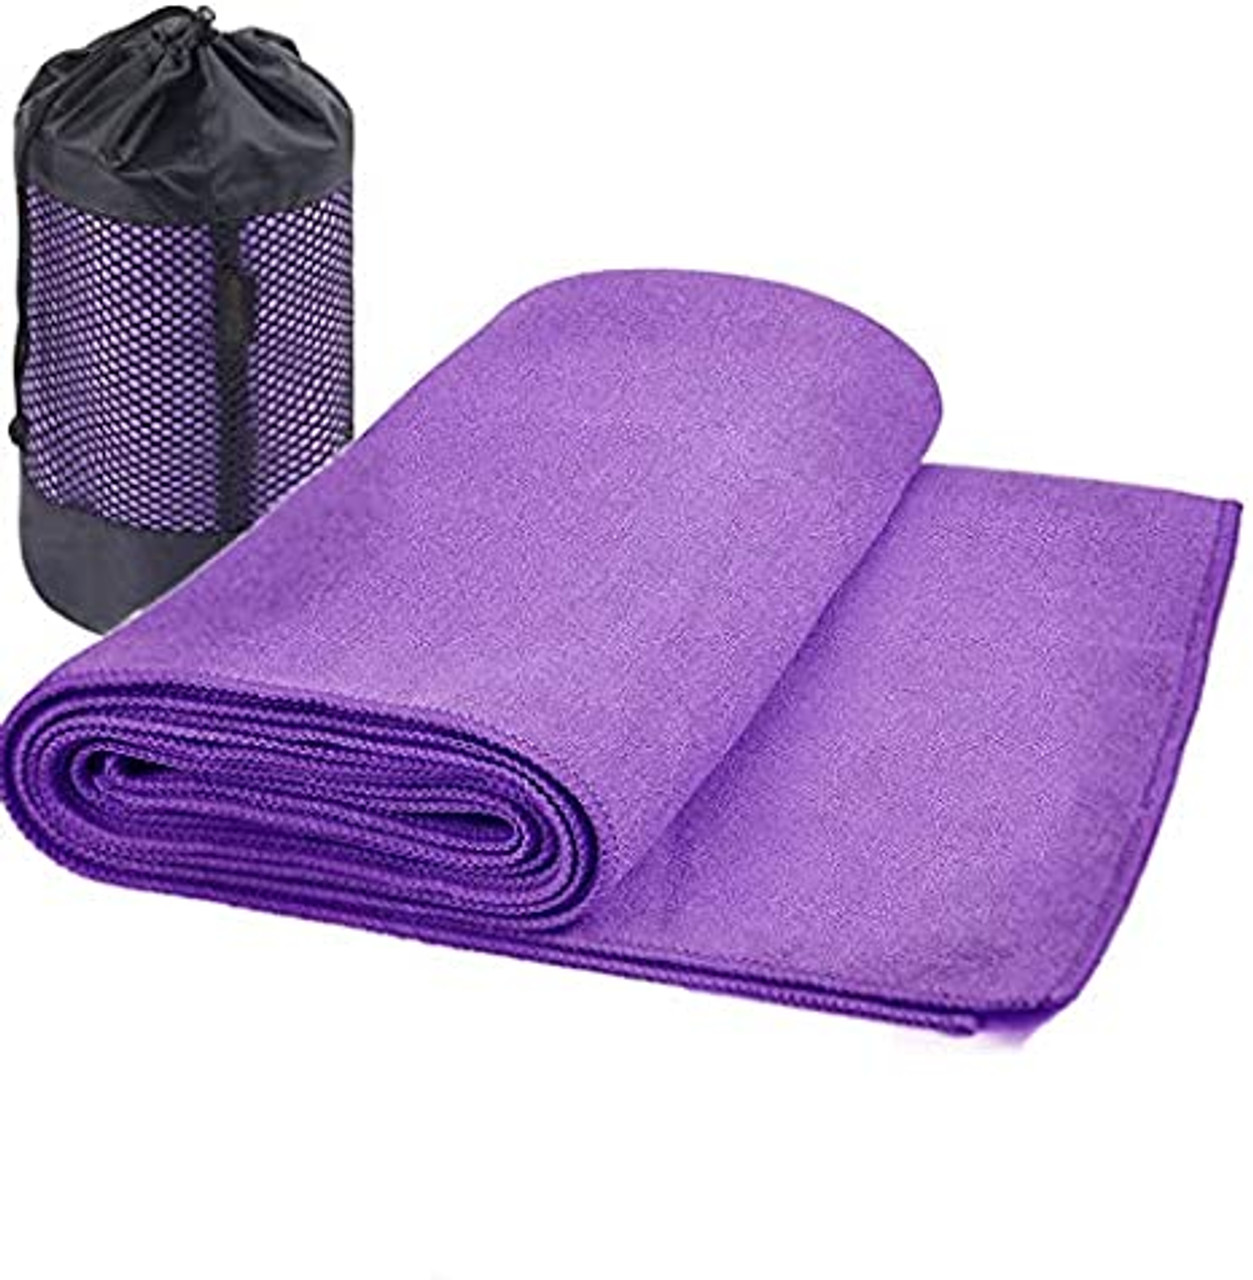 Lyrovo Microfiber Yoga Towel Sweat Absorbent Soft Non-Slip Hot Yoga Towel  with Carry Bag Size: 24 inches x 72 inches